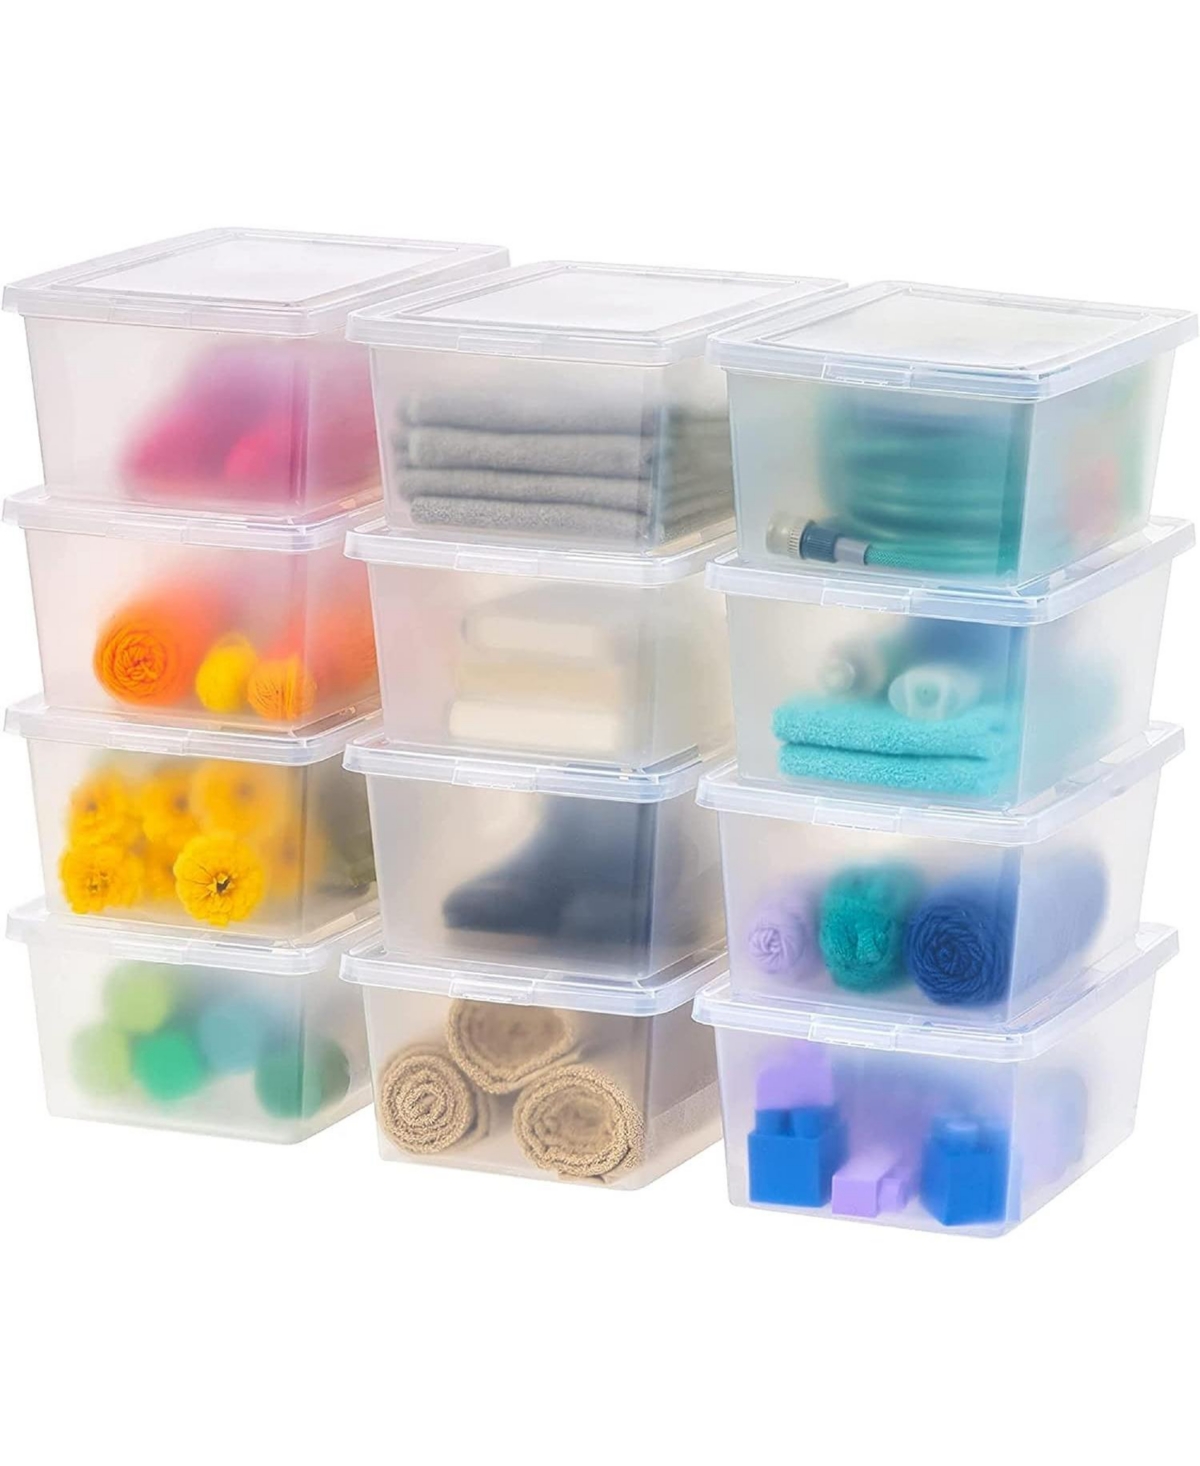 17 Qt Clear Storage Box, Bpa-Free Plastic Stackable Bin with Lid, 12 Pack, Containers to Organize Shoes and Closet Shelves, Classroom Organiz